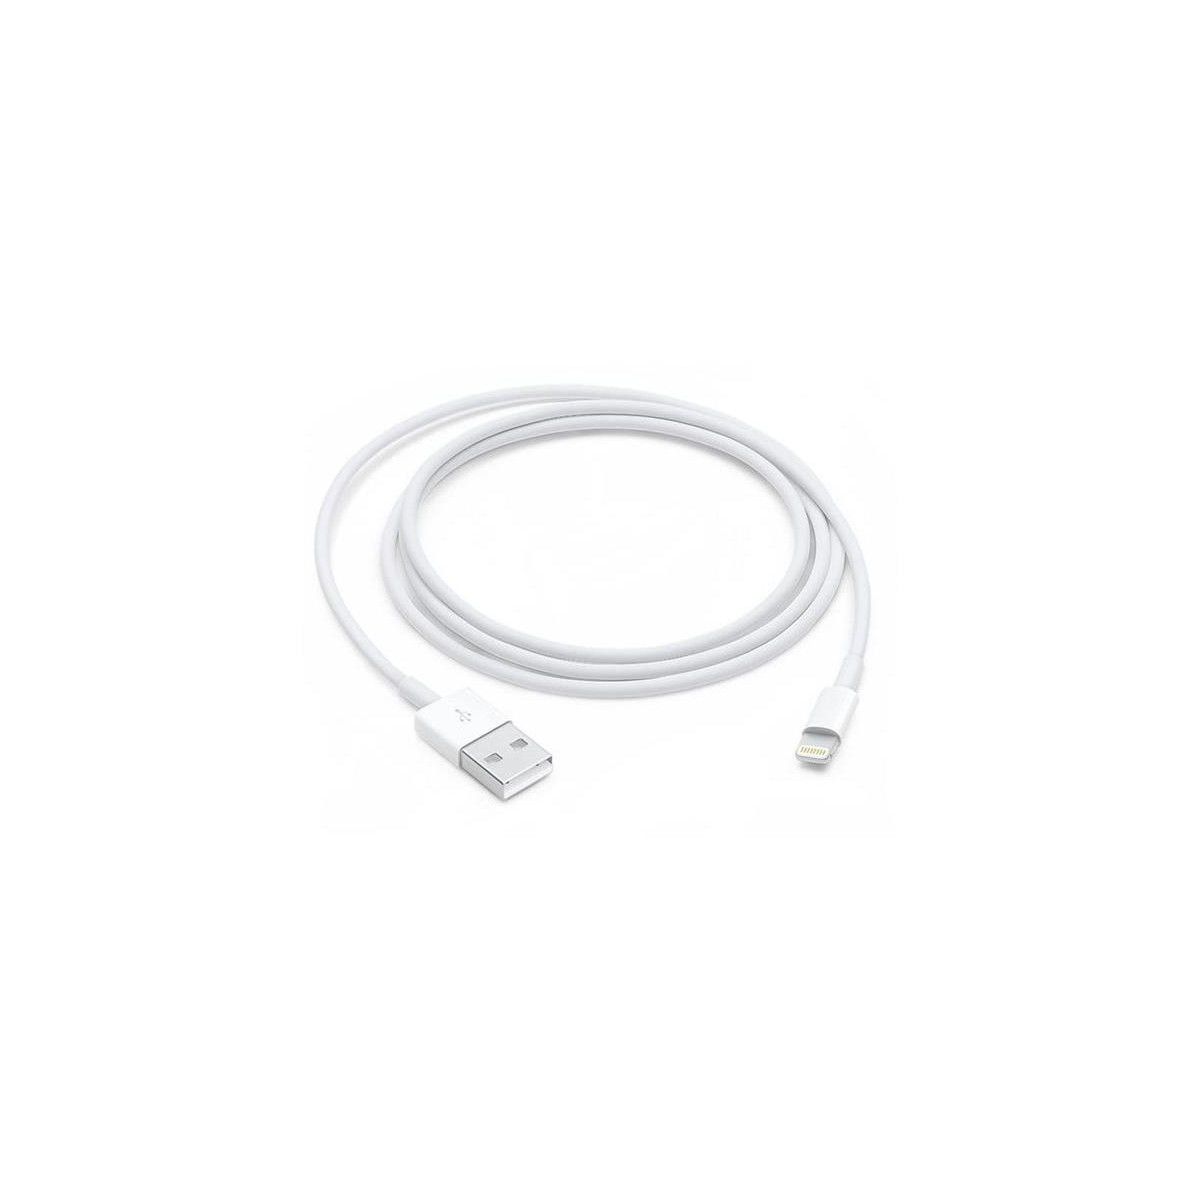 More about Kabel MFIMD818 USB/Lightning iPhone 5, 6, 7, 8, X, 11 1m White